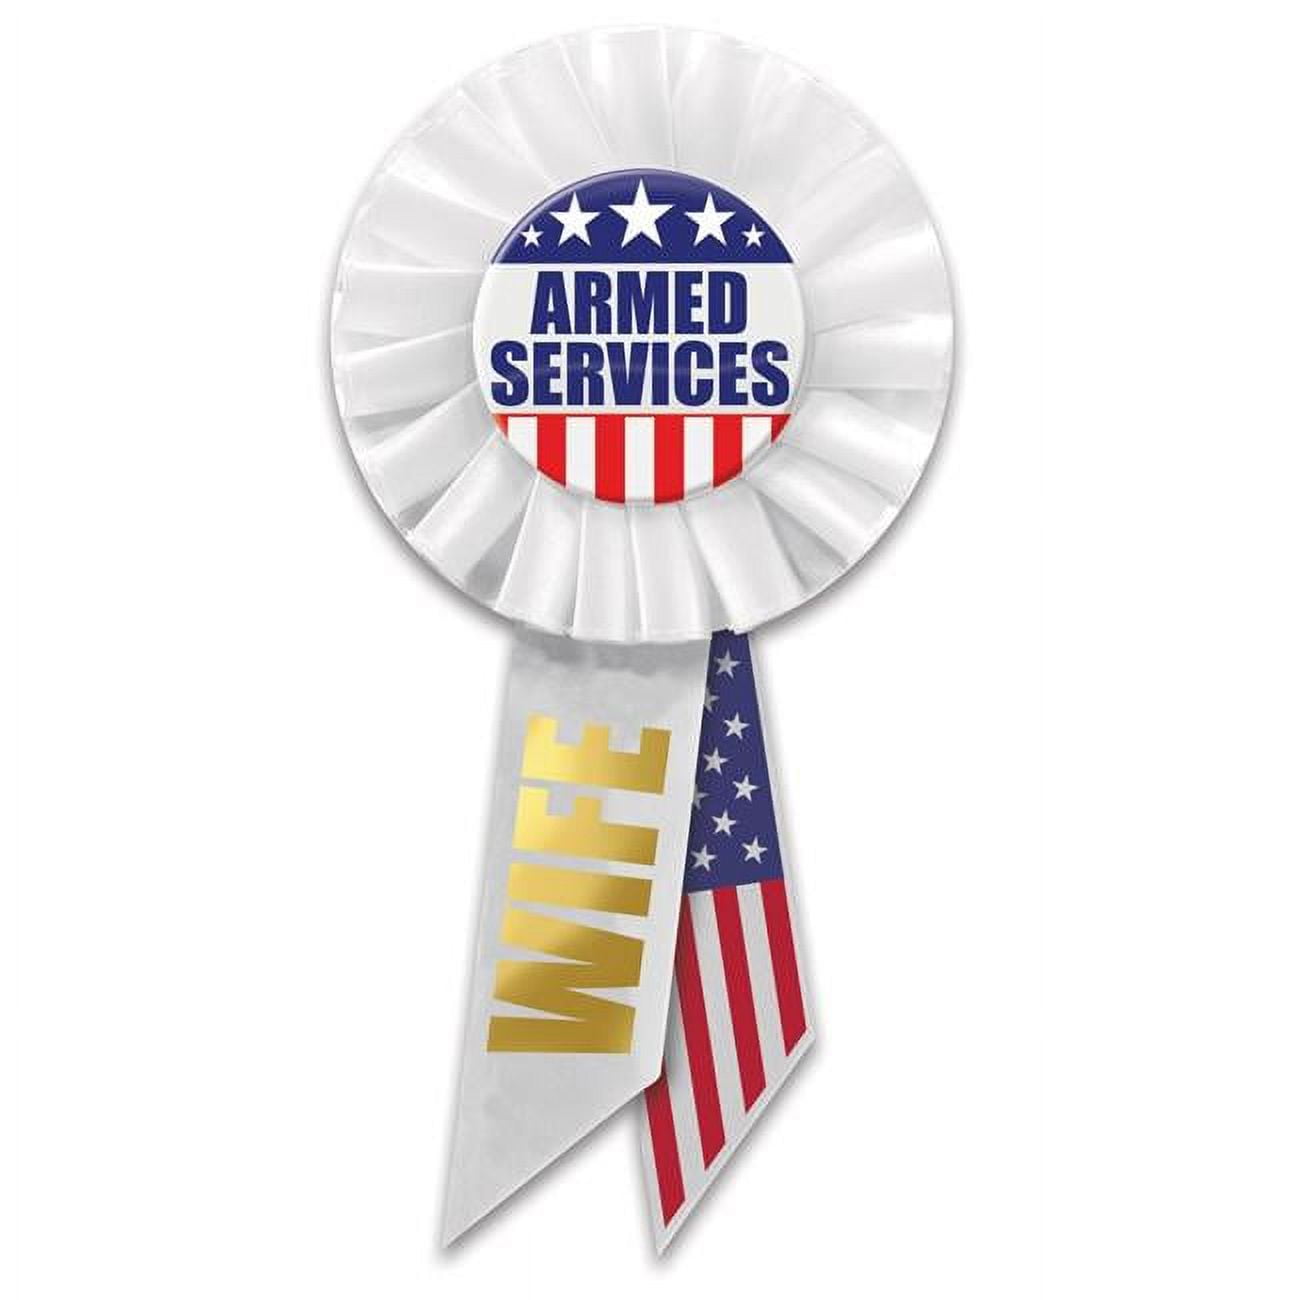 Picture of Beistle RS516 3.25 x 6.5 in. Armed Services Wife Rosette